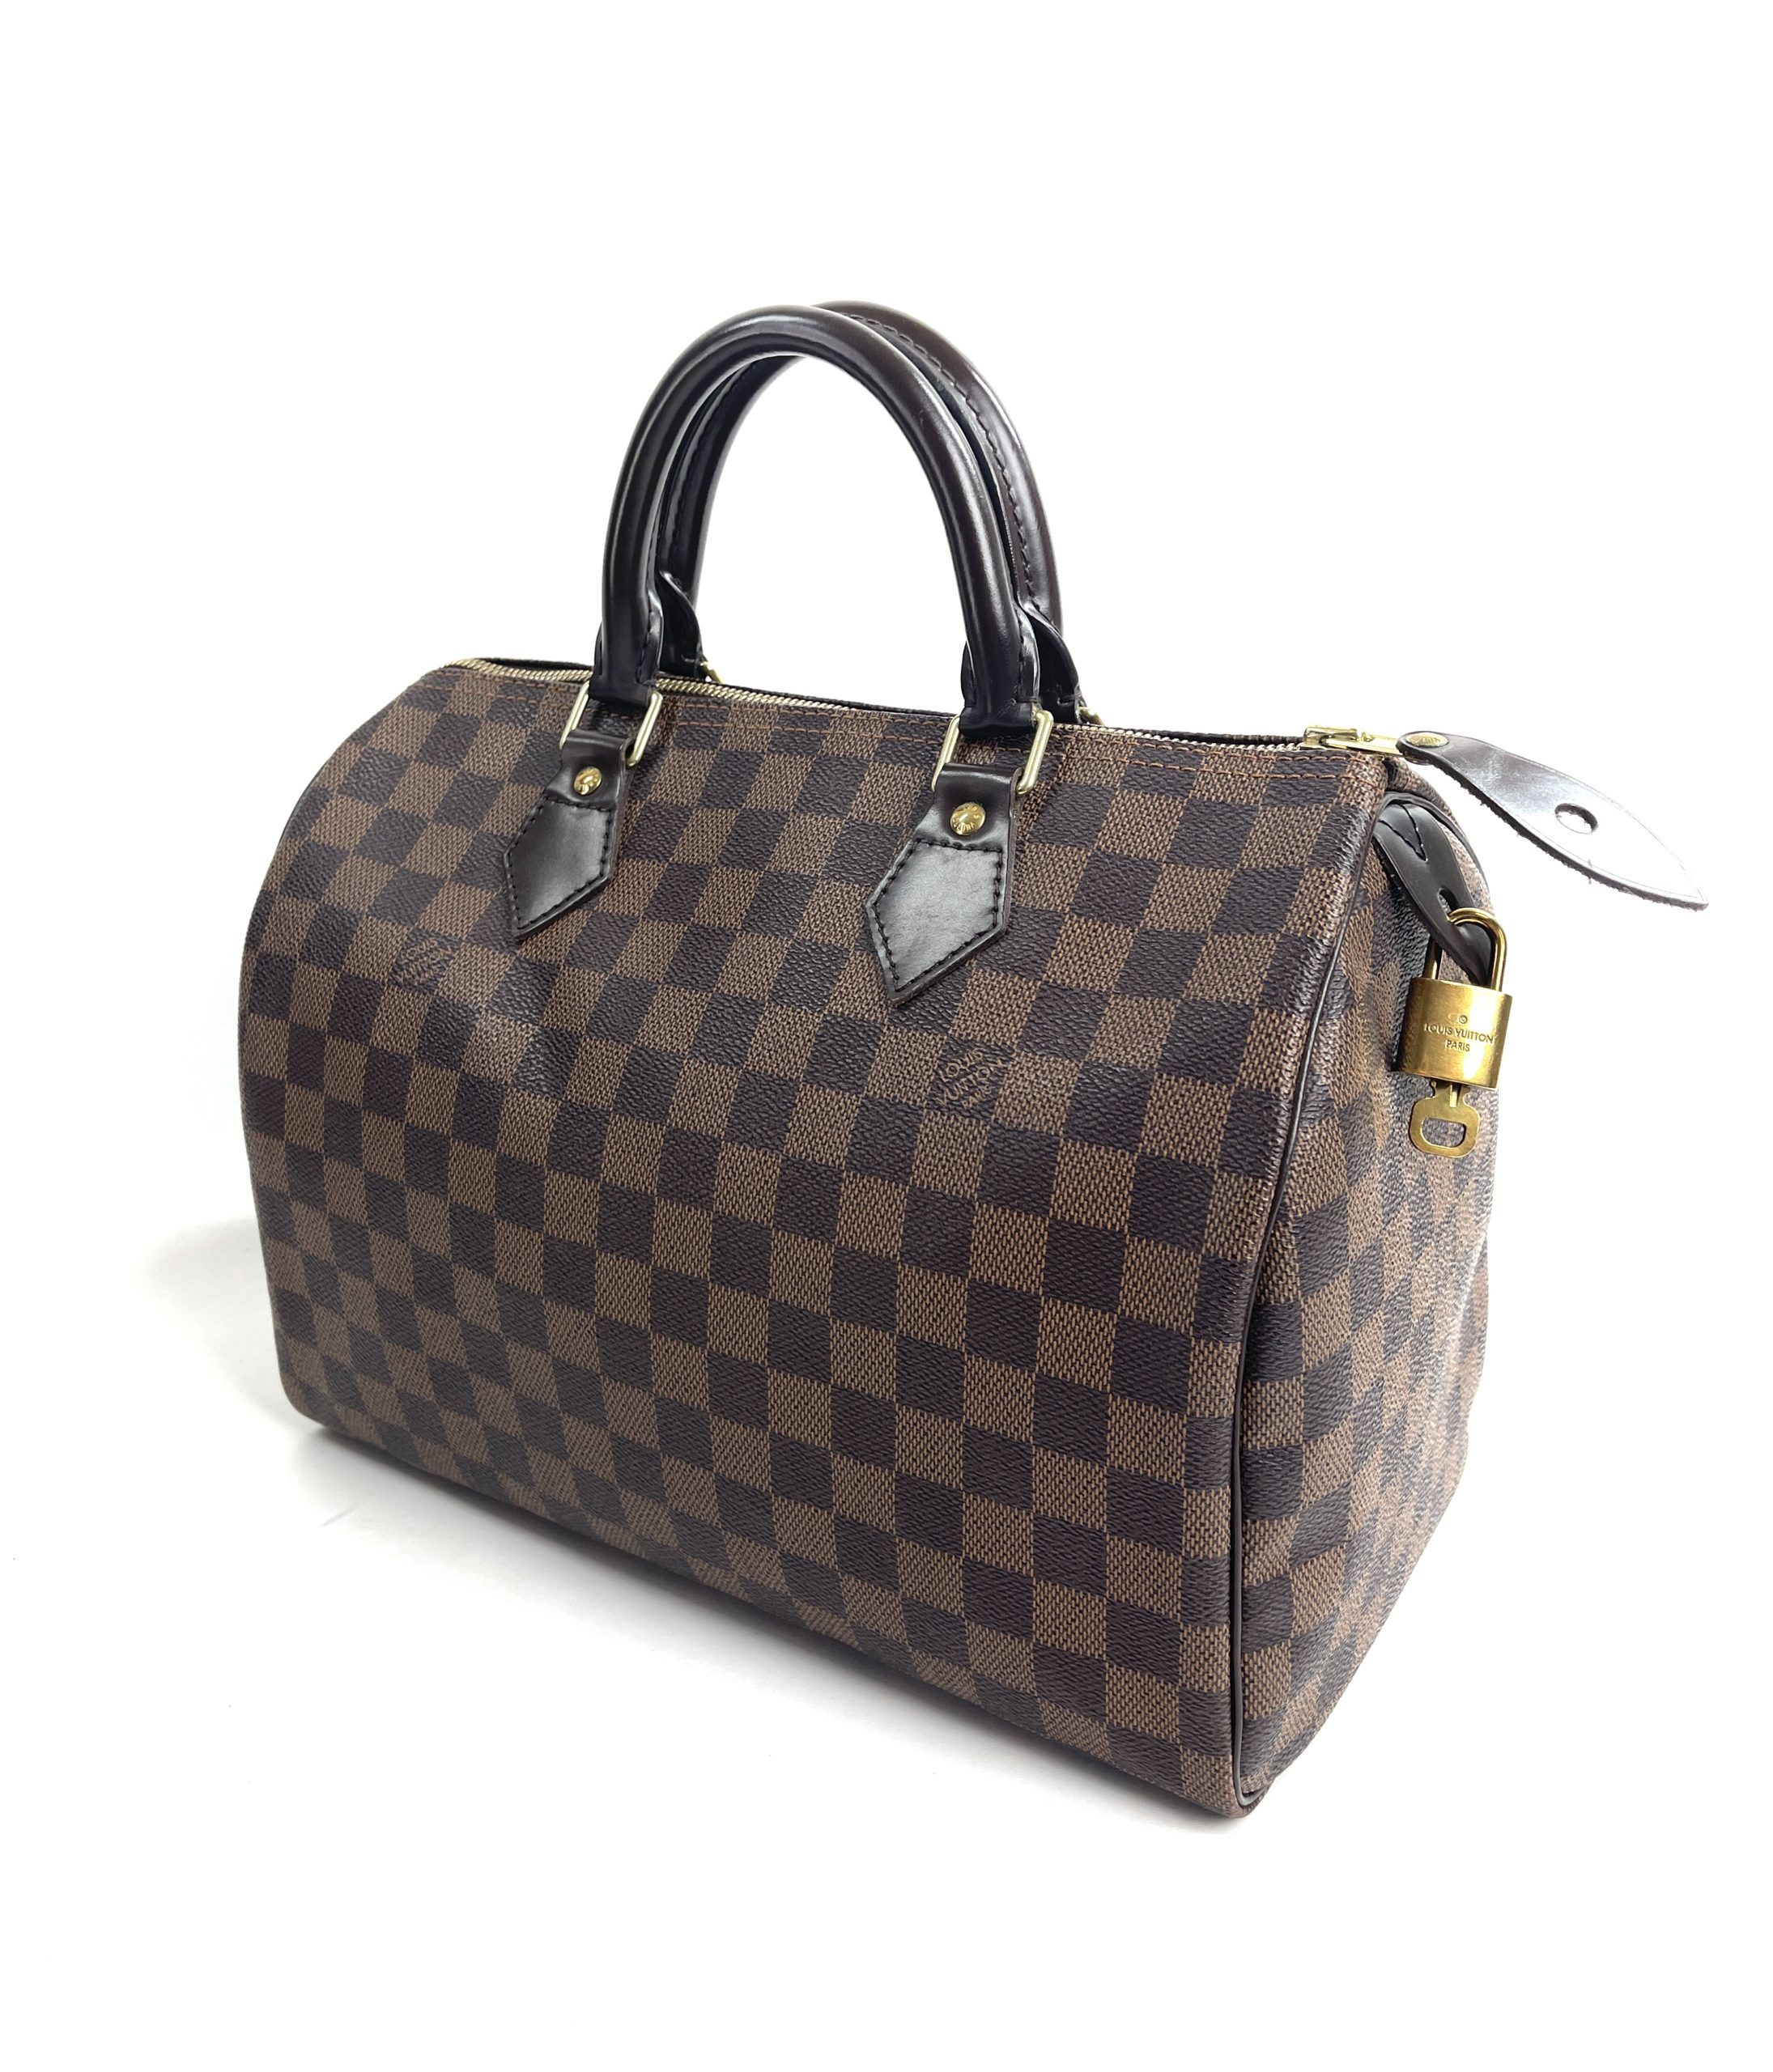 Authentic LOUIS VUITTON Damier Ebene Speedy 30 N41364 with red lining